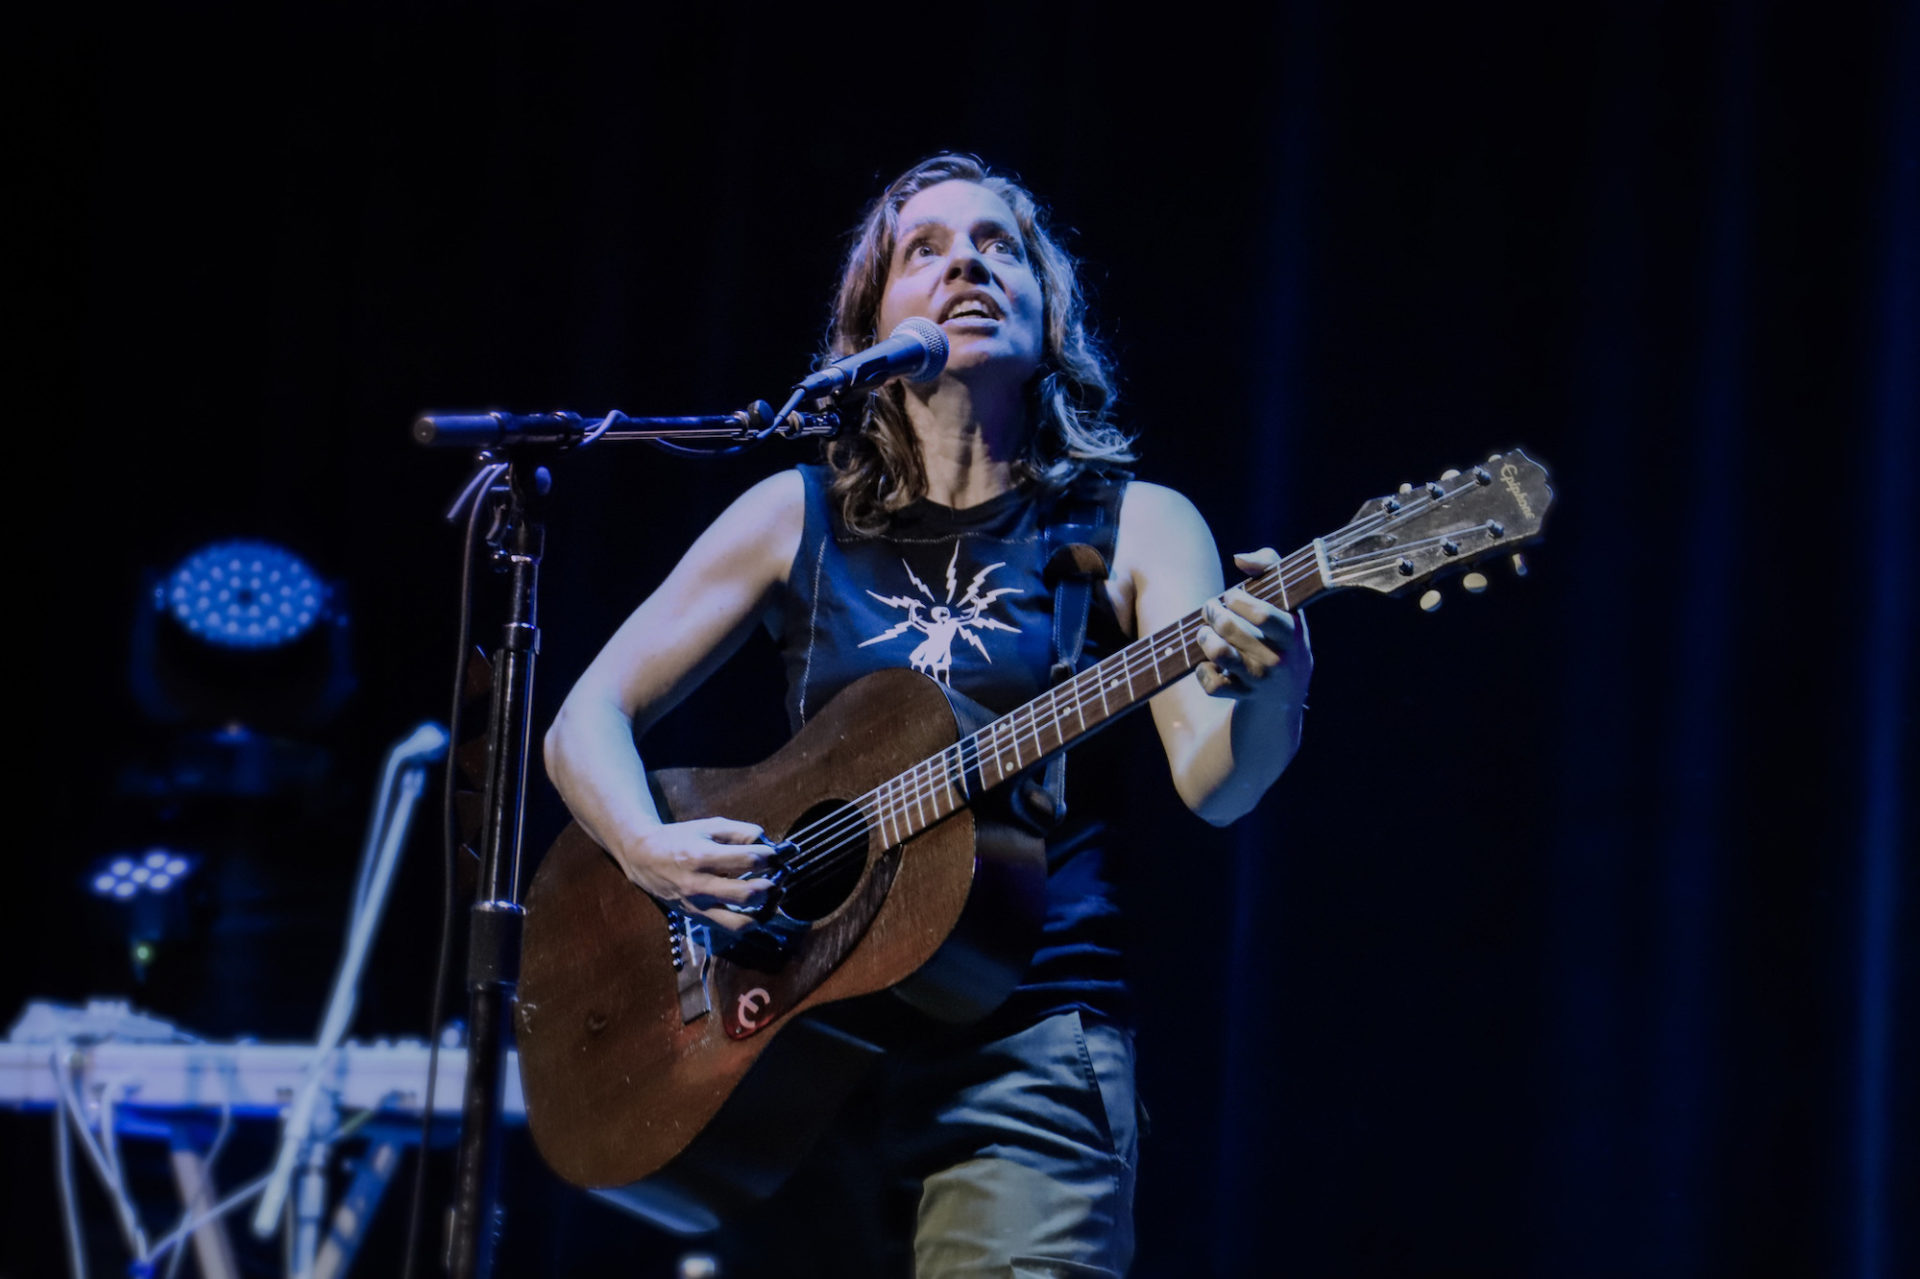 Ani DiFranco, a white woman with long hair, plays guitar on stage while singing into the microphone